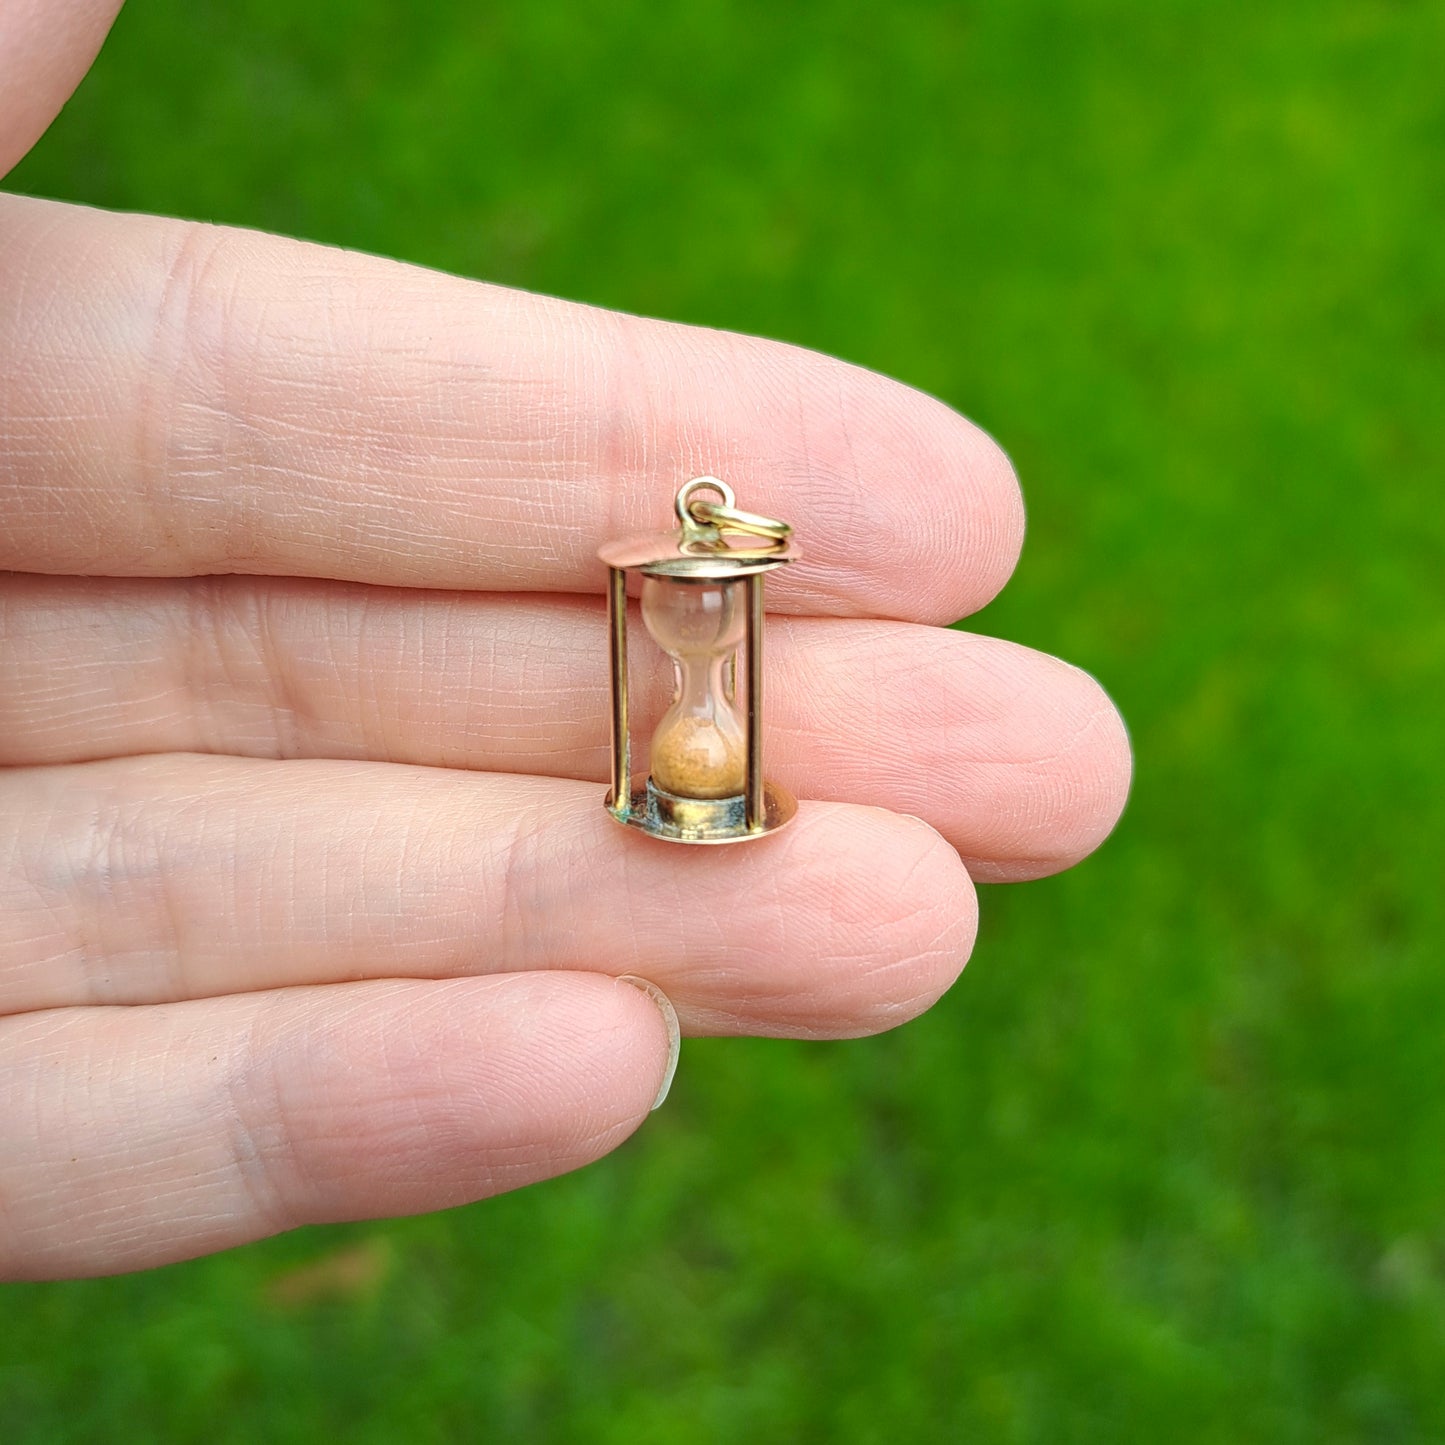 Vintage 9ct Gold Sand Timer / Hourglass Charm, 1960s